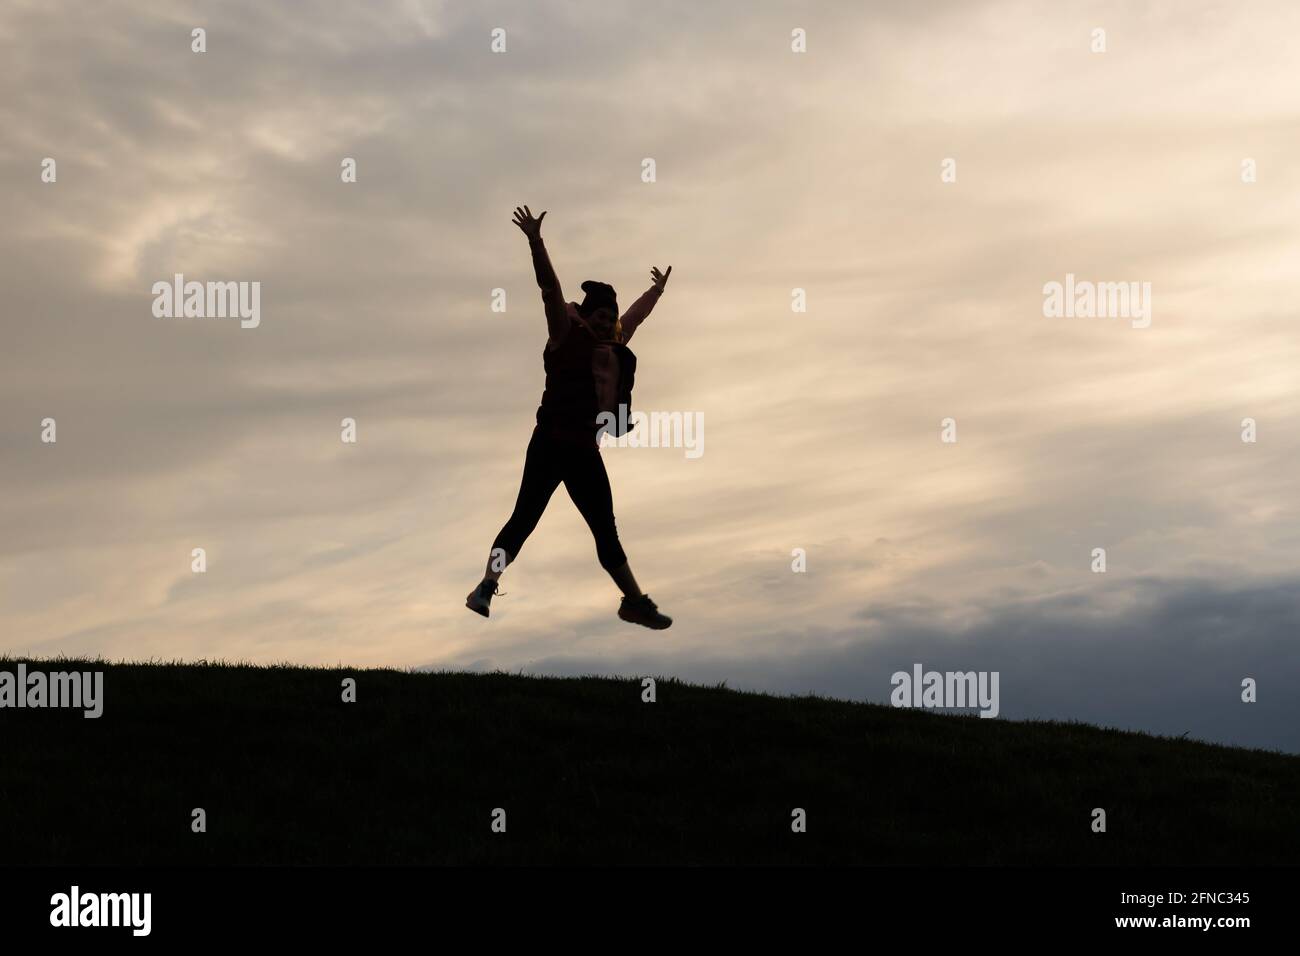 Silhouette of sporty woman jumping into the air on top of a hill at sunset. Star pose. Concept of happiness, celebratory energy. Stock Photo